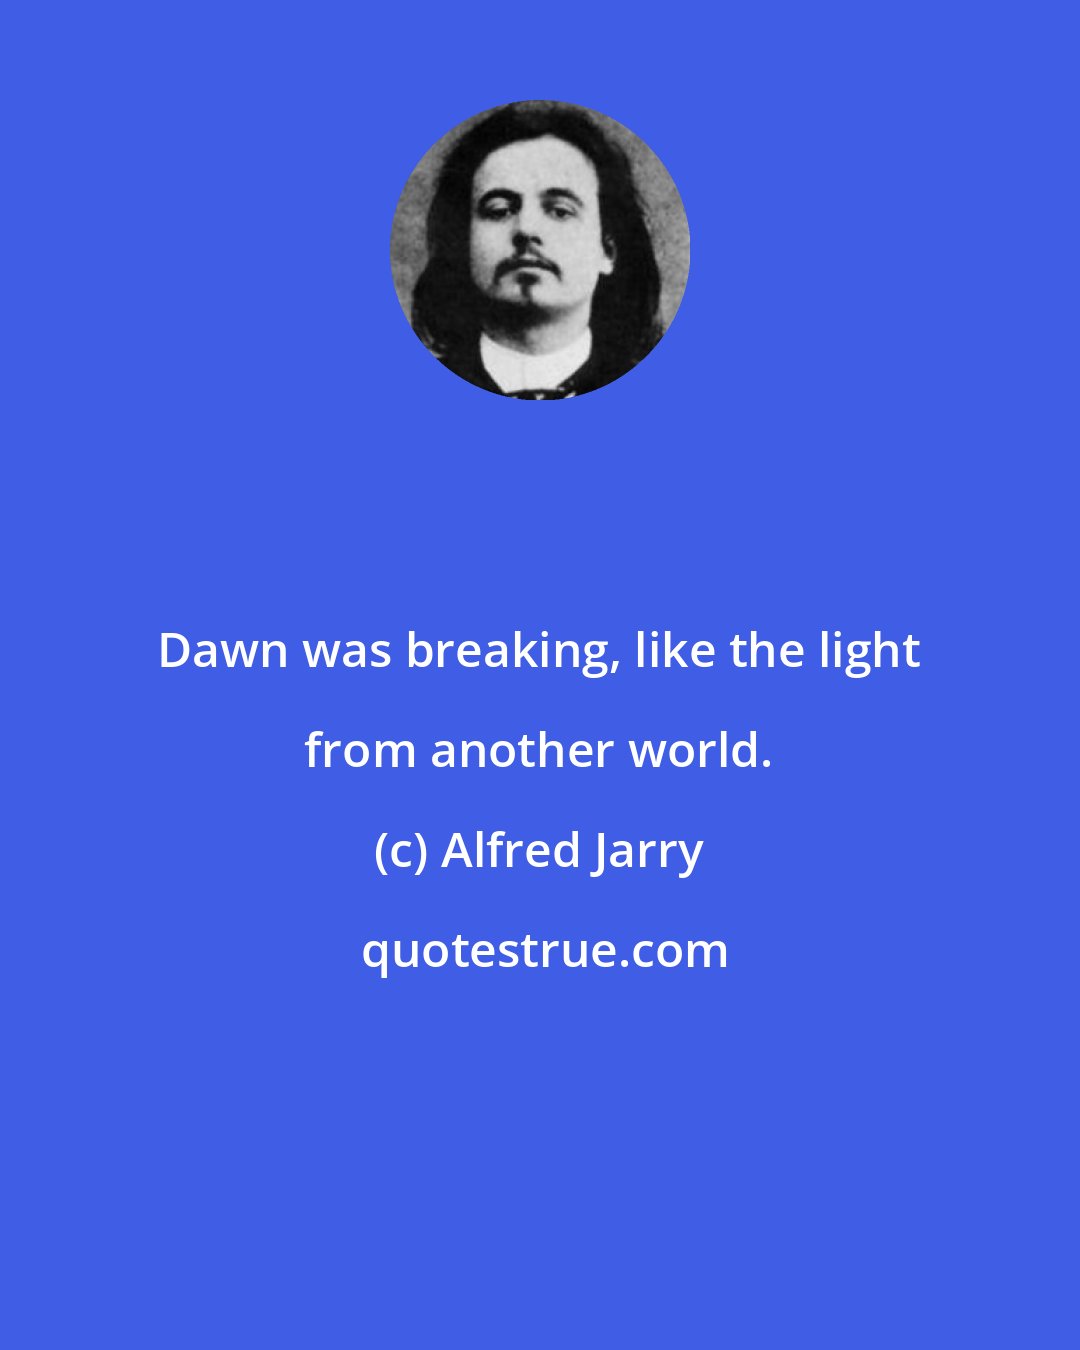 Alfred Jarry: Dawn was breaking, like the light from another world.